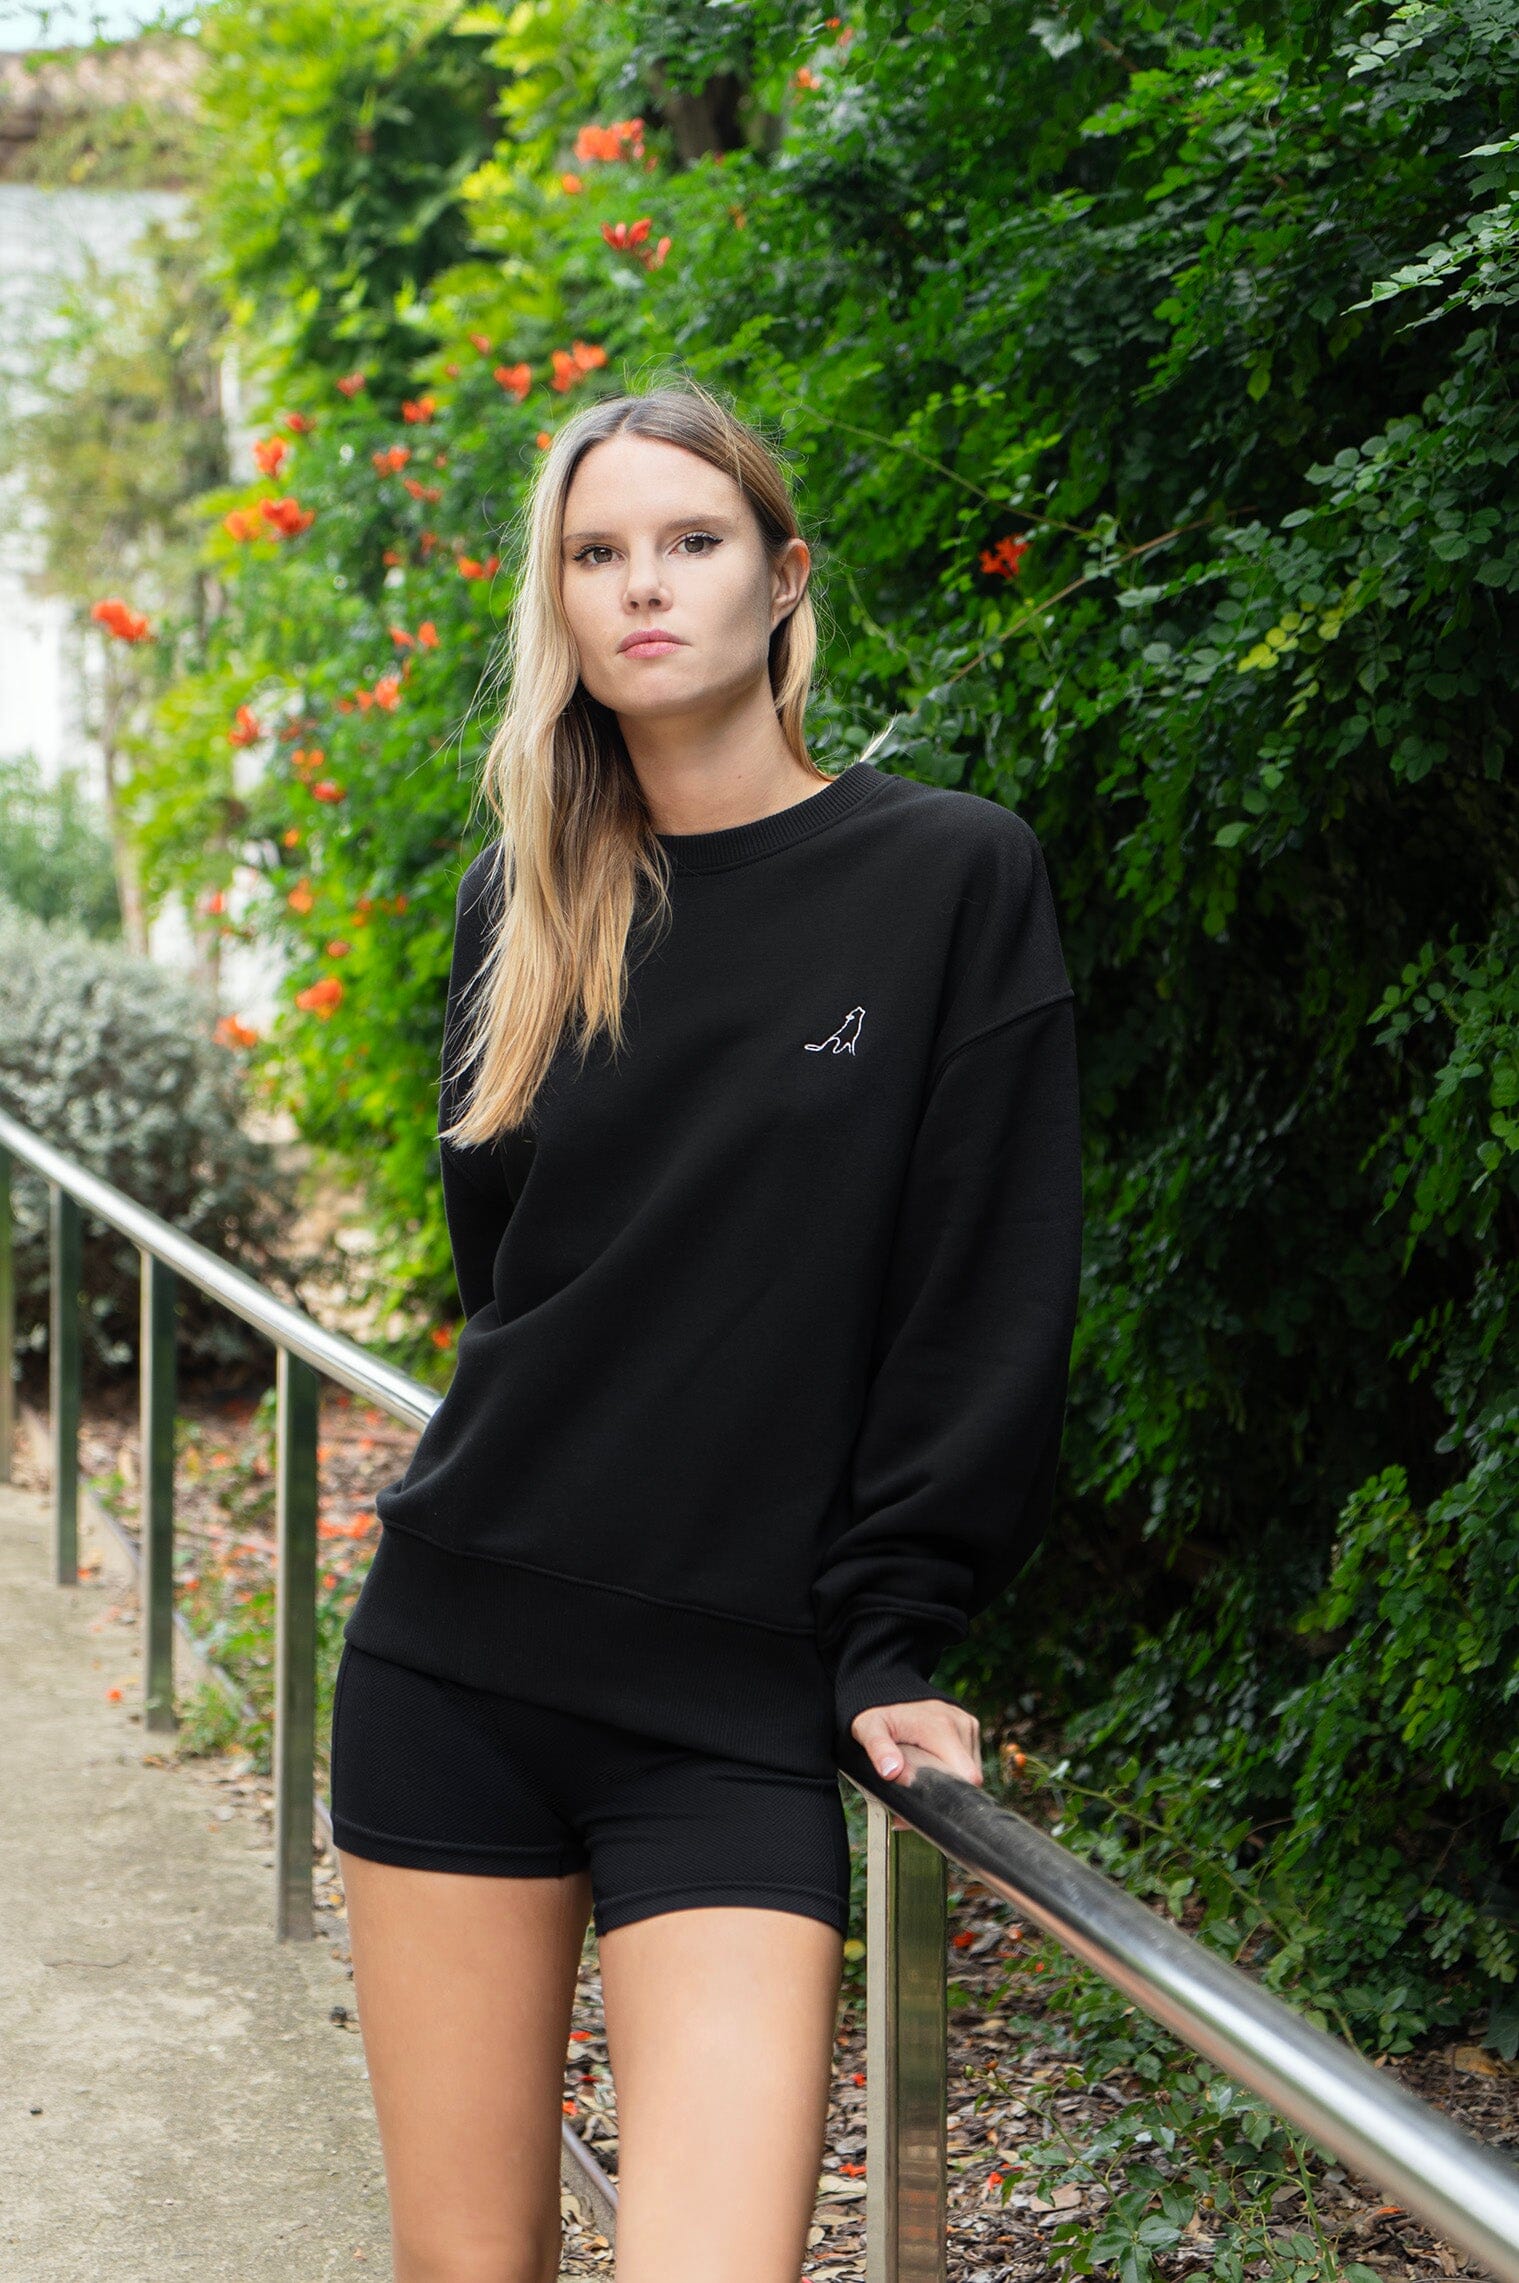 Women's Relaxed Sweatshirt | Jungle x Embroidered Wolf